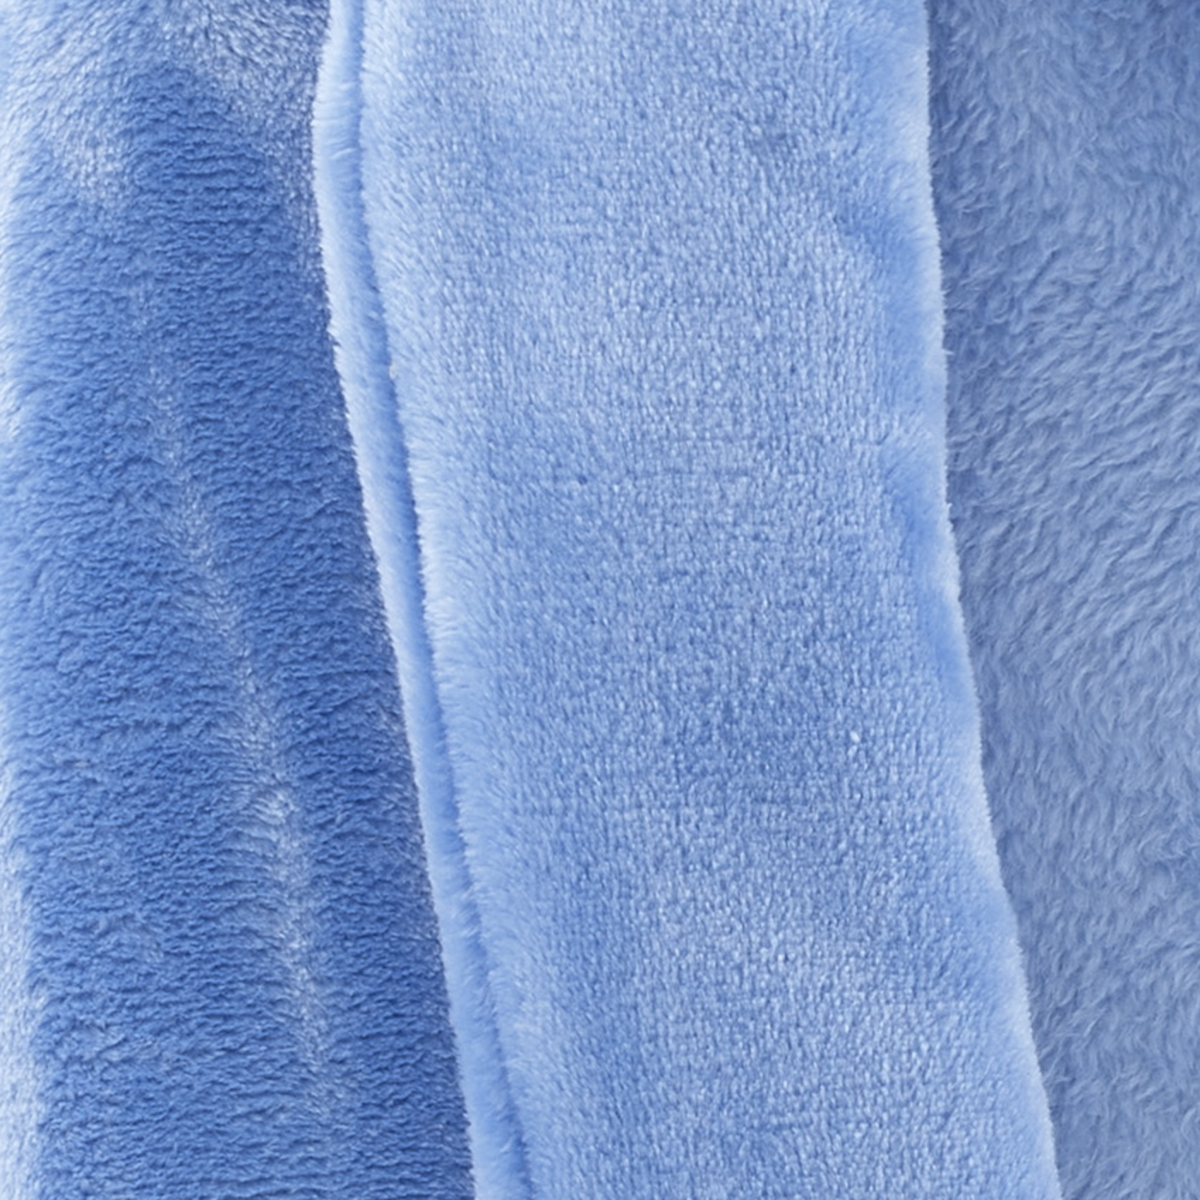 Swatch Sample of Pine Cone Hill Sheepy Fleece 2.0 Robe in Color French Blue